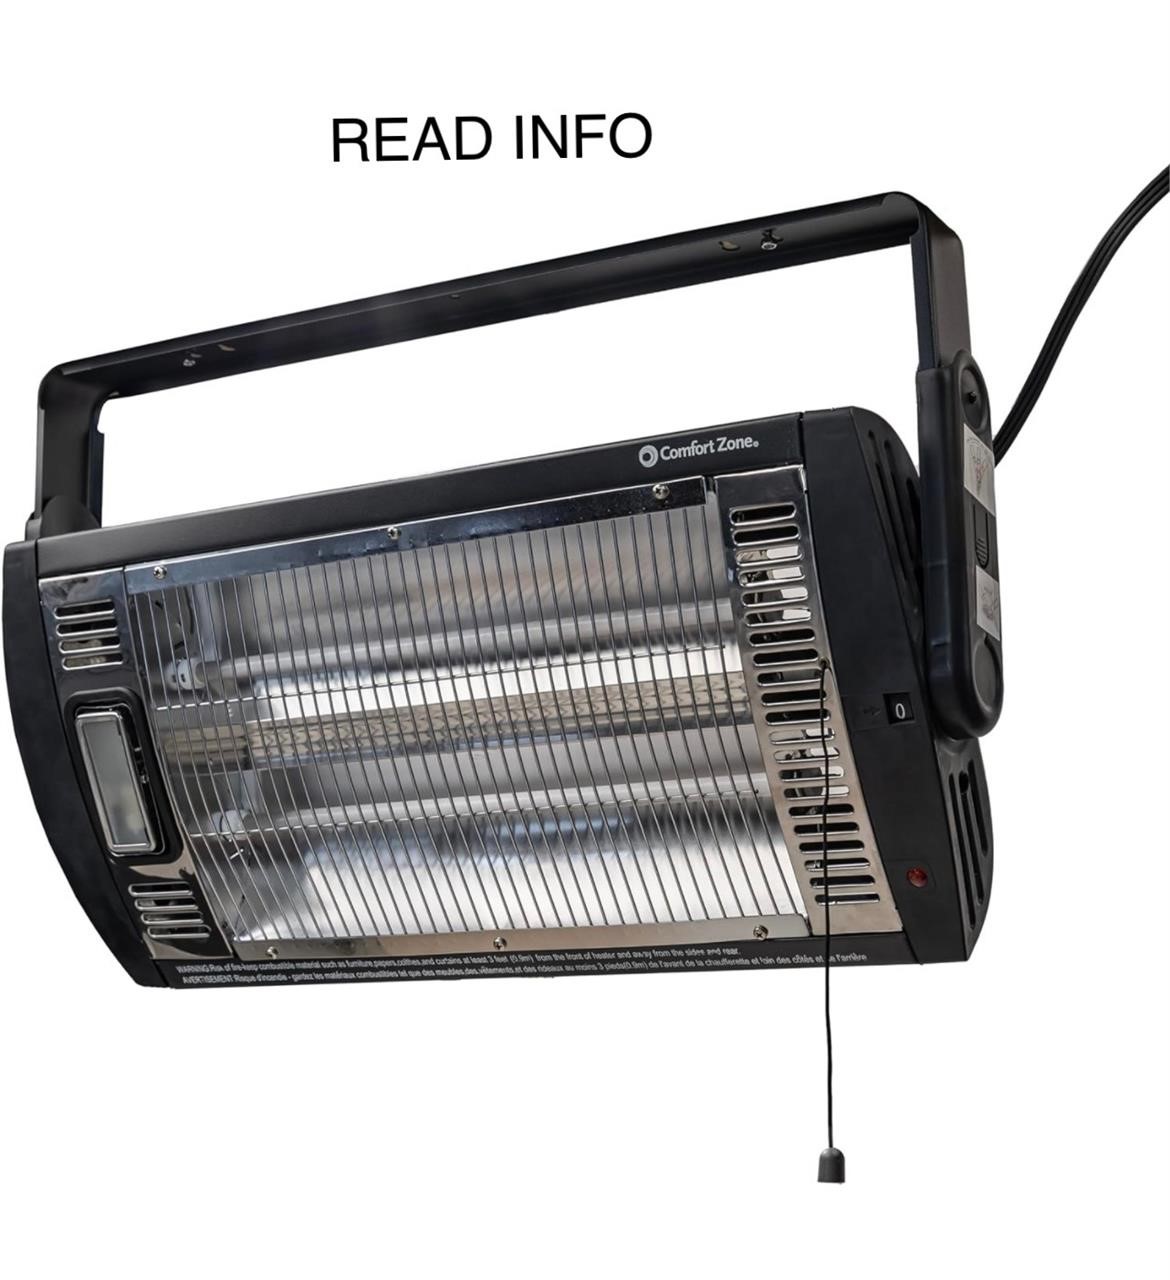 Comfort Zone Ceiling Mounted Heater, READ INFO